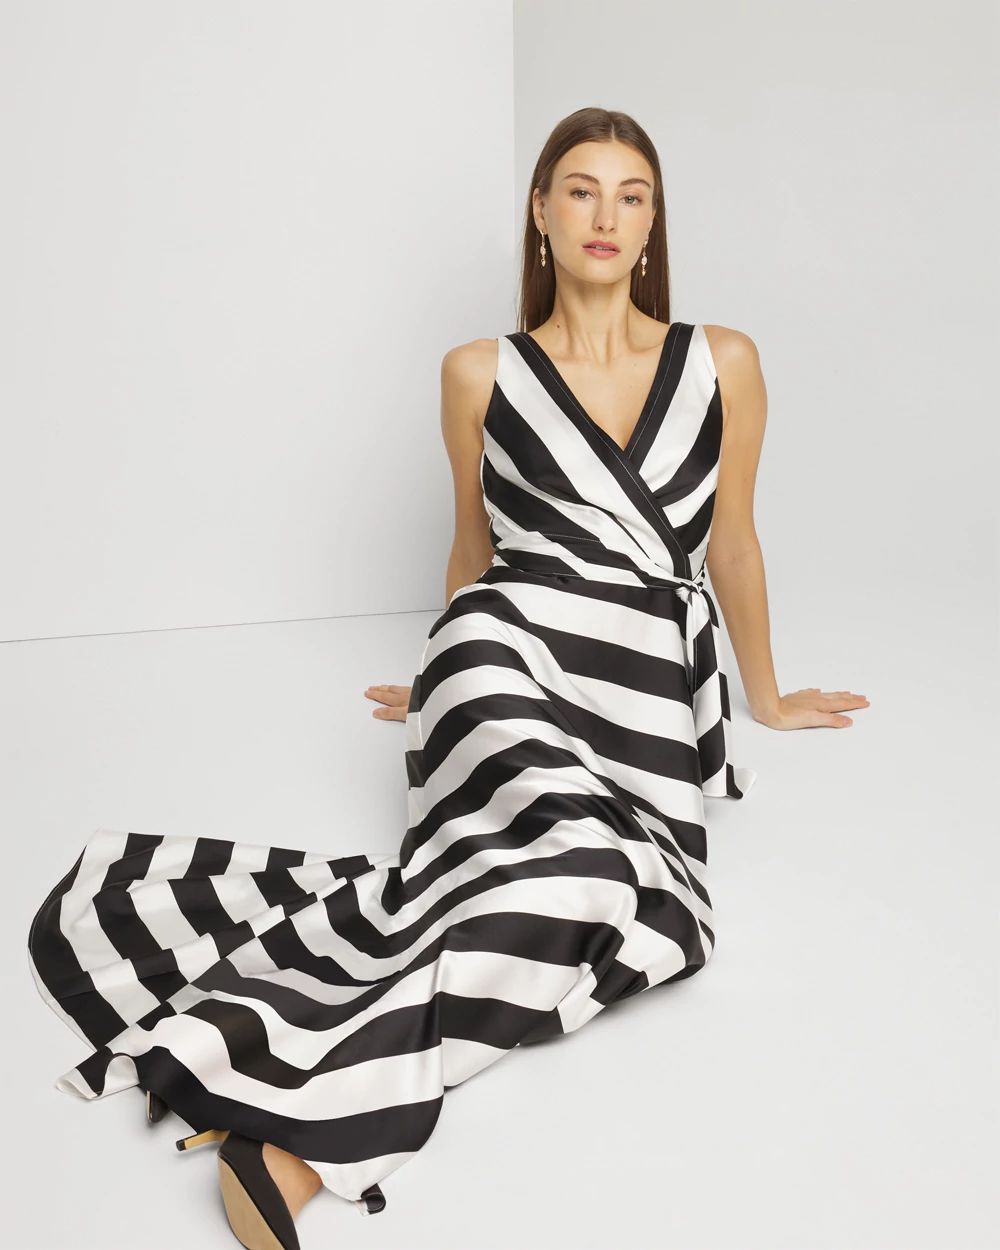 Sleeveless Stripe Fit & Flare Gown click to view larger image.